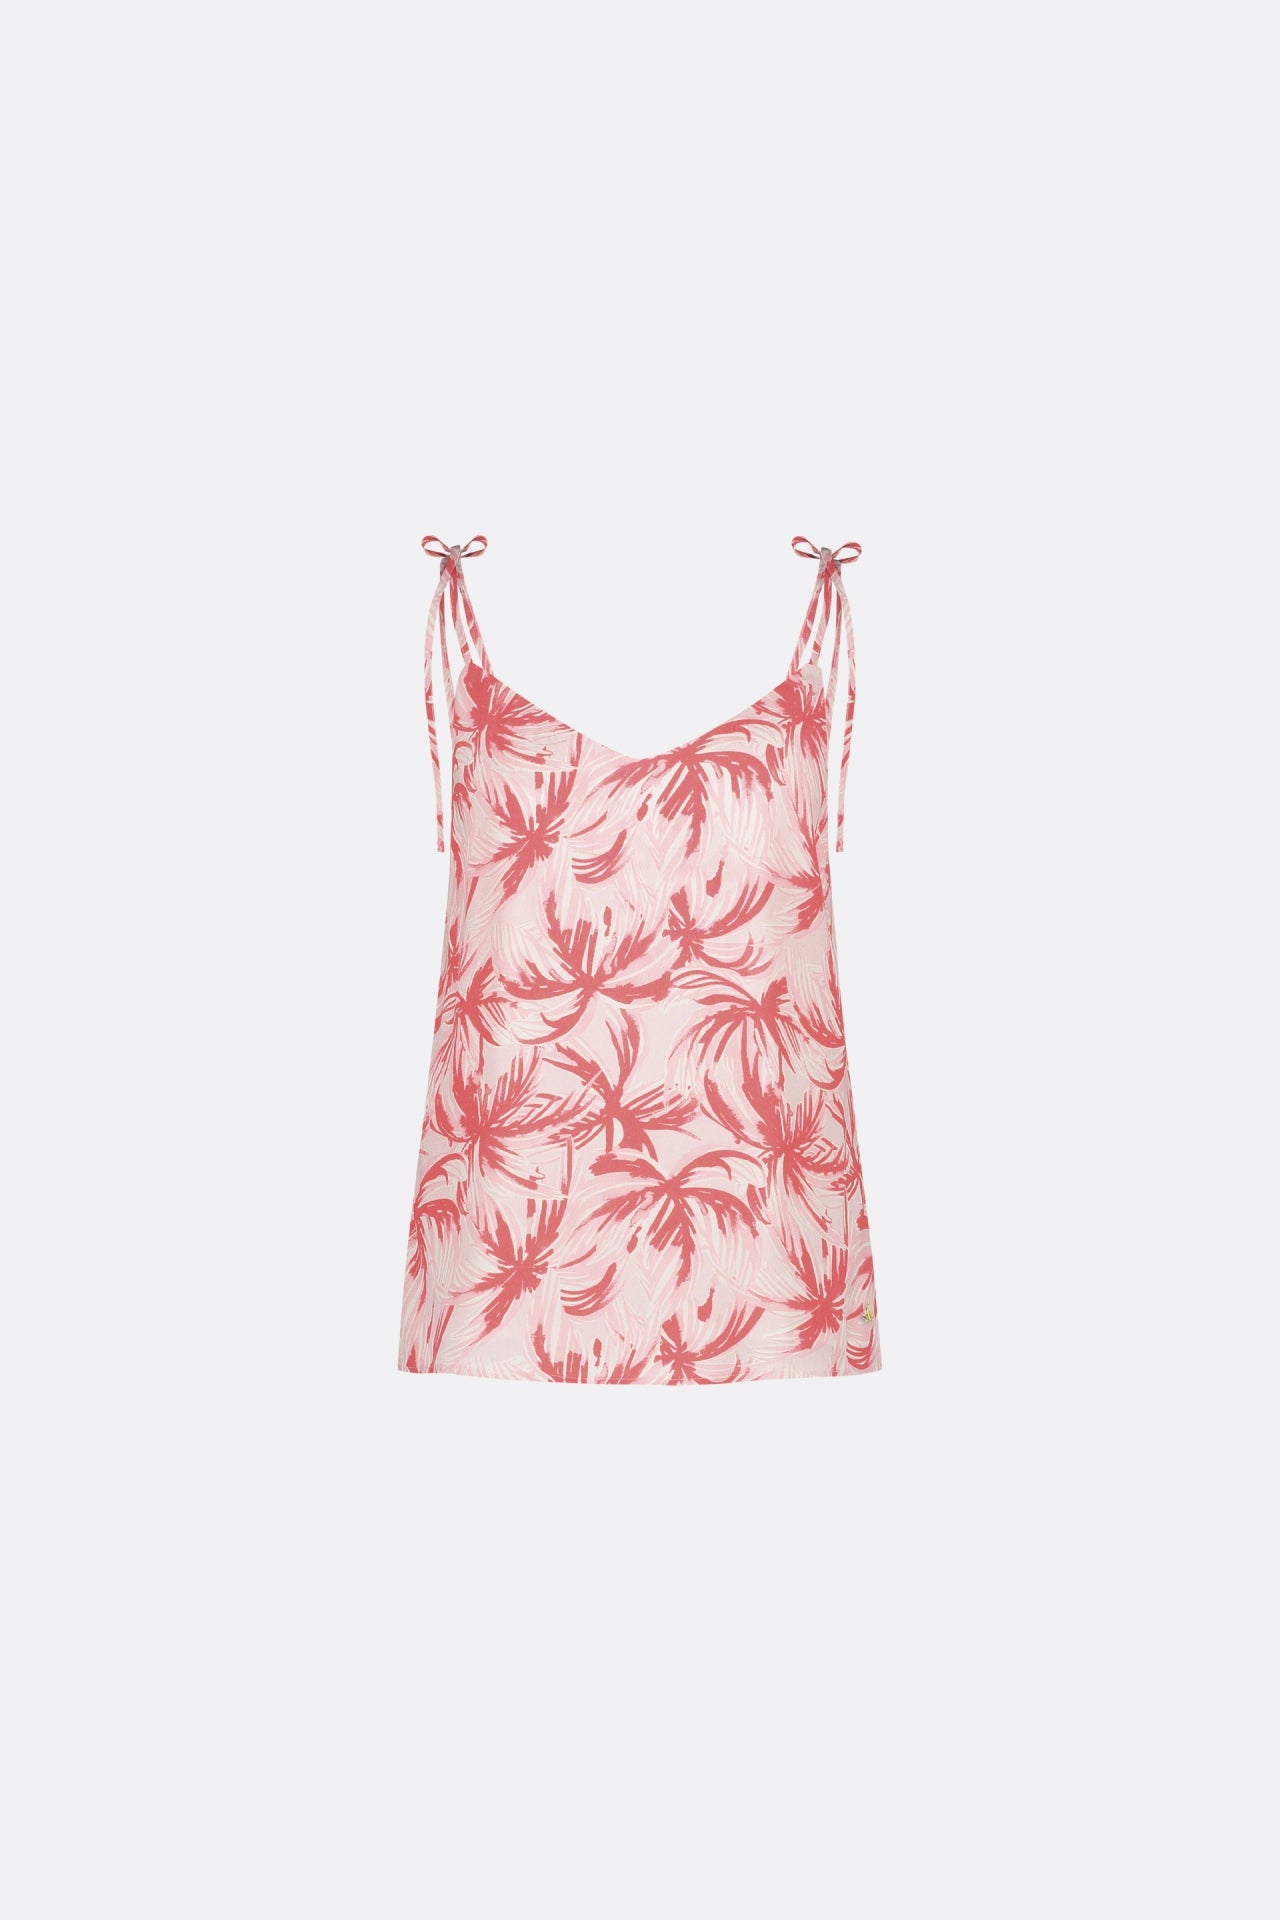 A Palmeraie Mini top from Fabienne Chapot with a pink palm print.